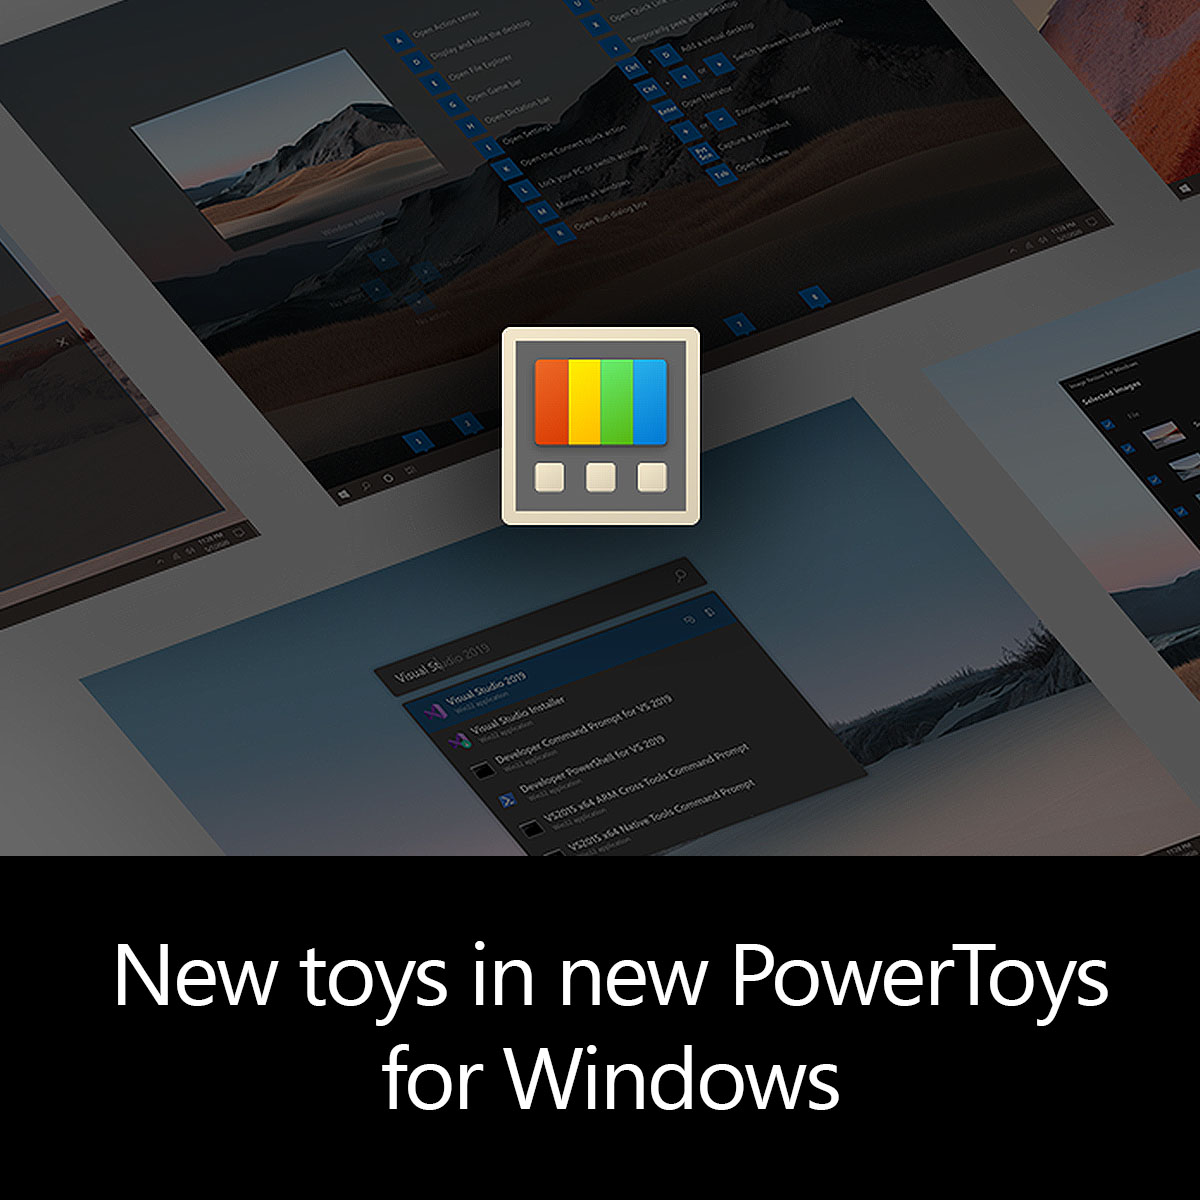 New toys in new PowerToys for Windows